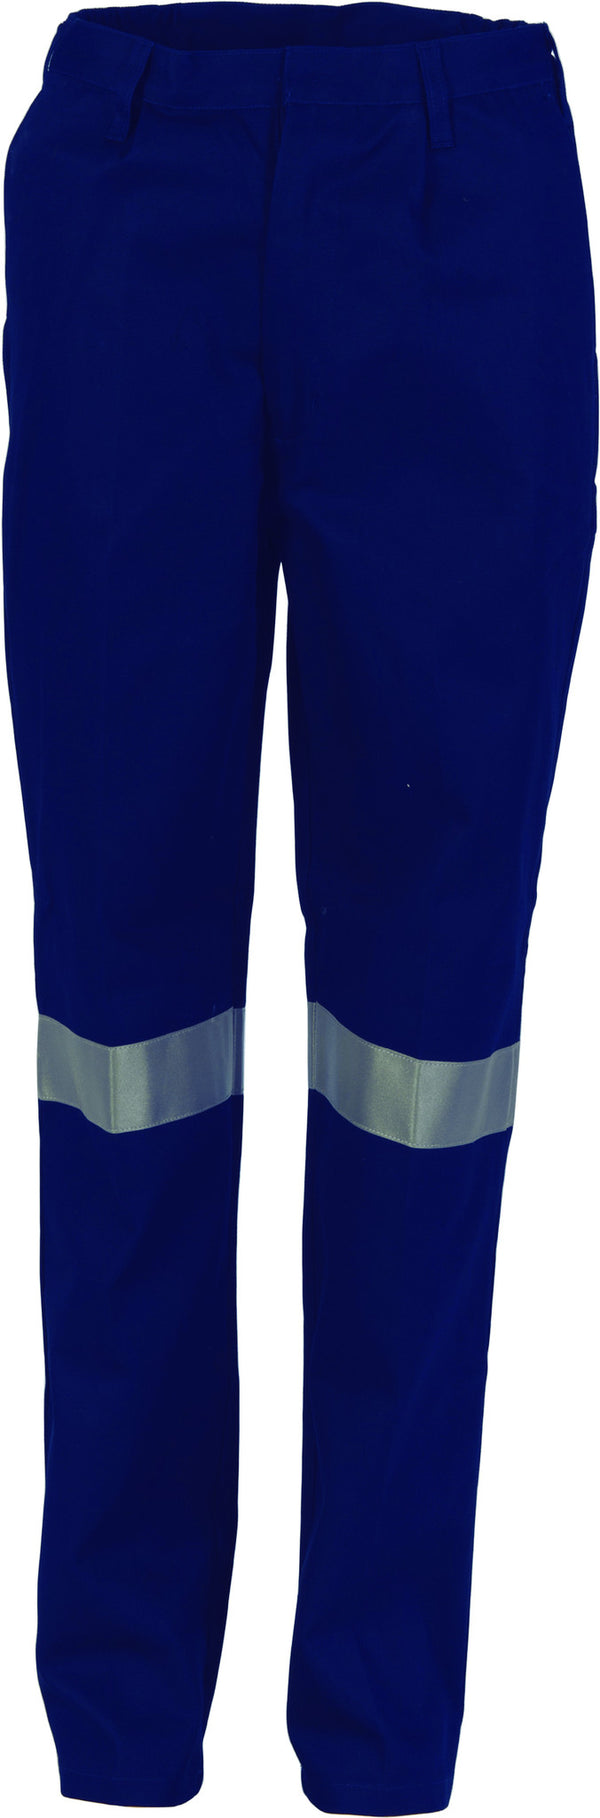 Ladies Cotton Drill Pants With 3M Reflectiv Tape